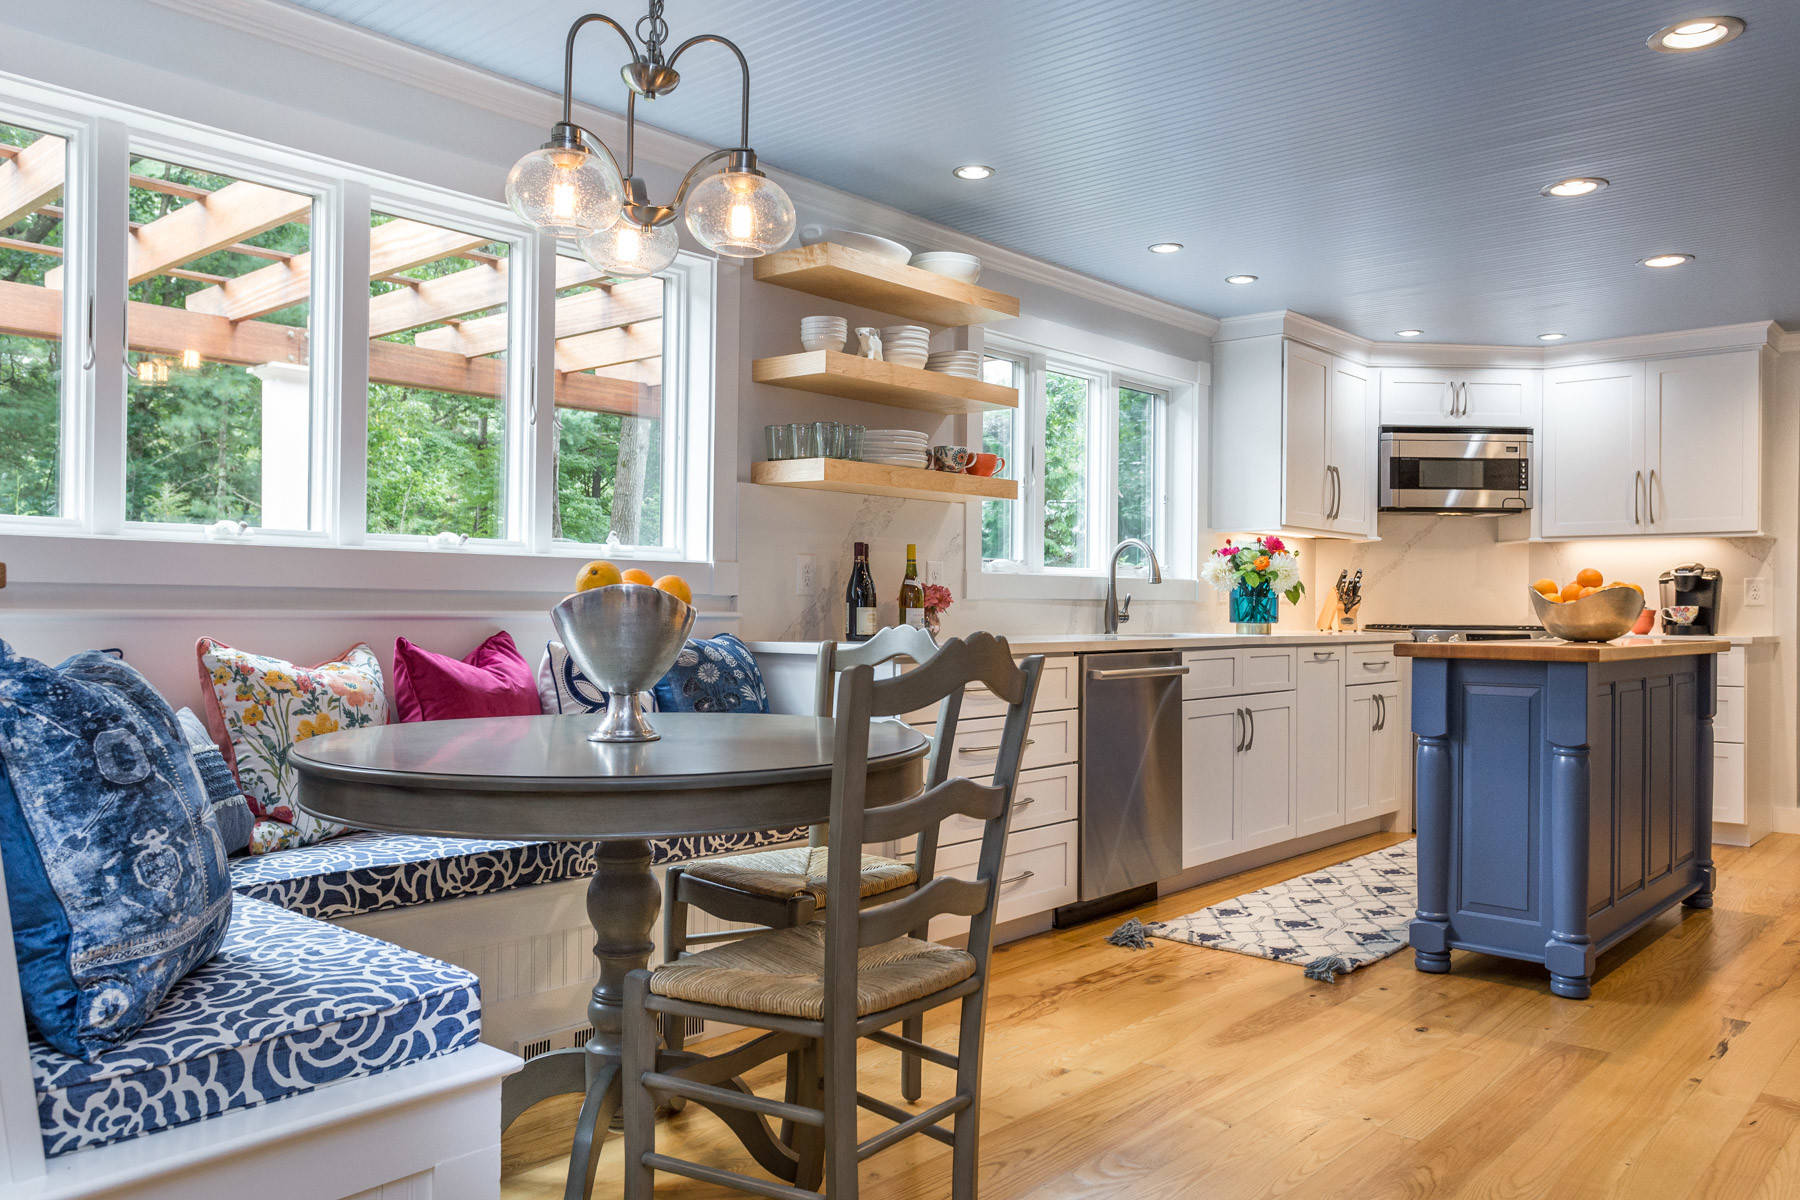 Contemporary Country - Kitchen and breakfast nook